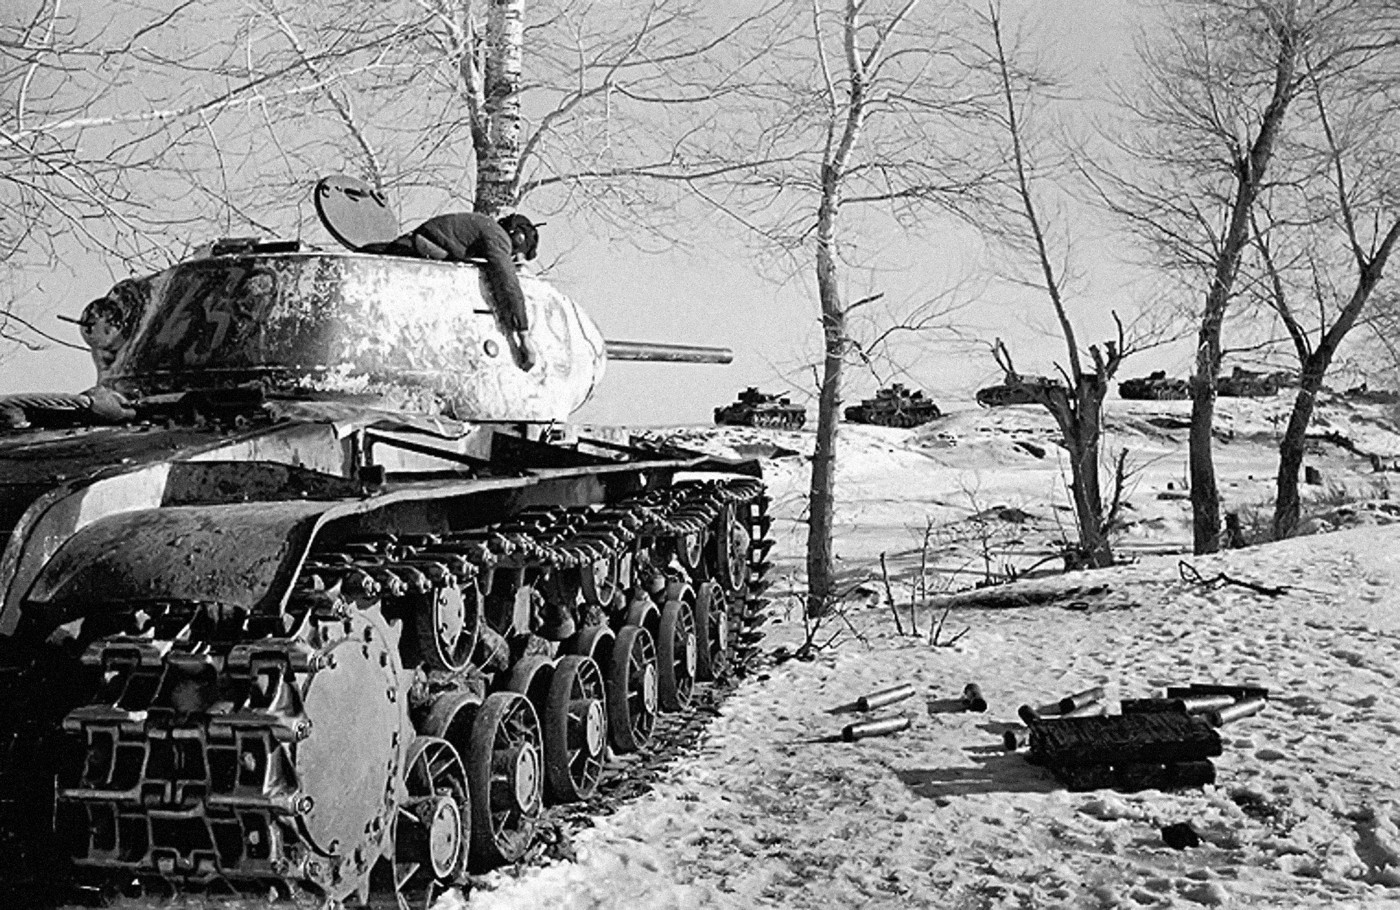 A knocked out KV-1S circa 1943, with the dead commander hanging from his cupola. It had just engaged the German column in the background.